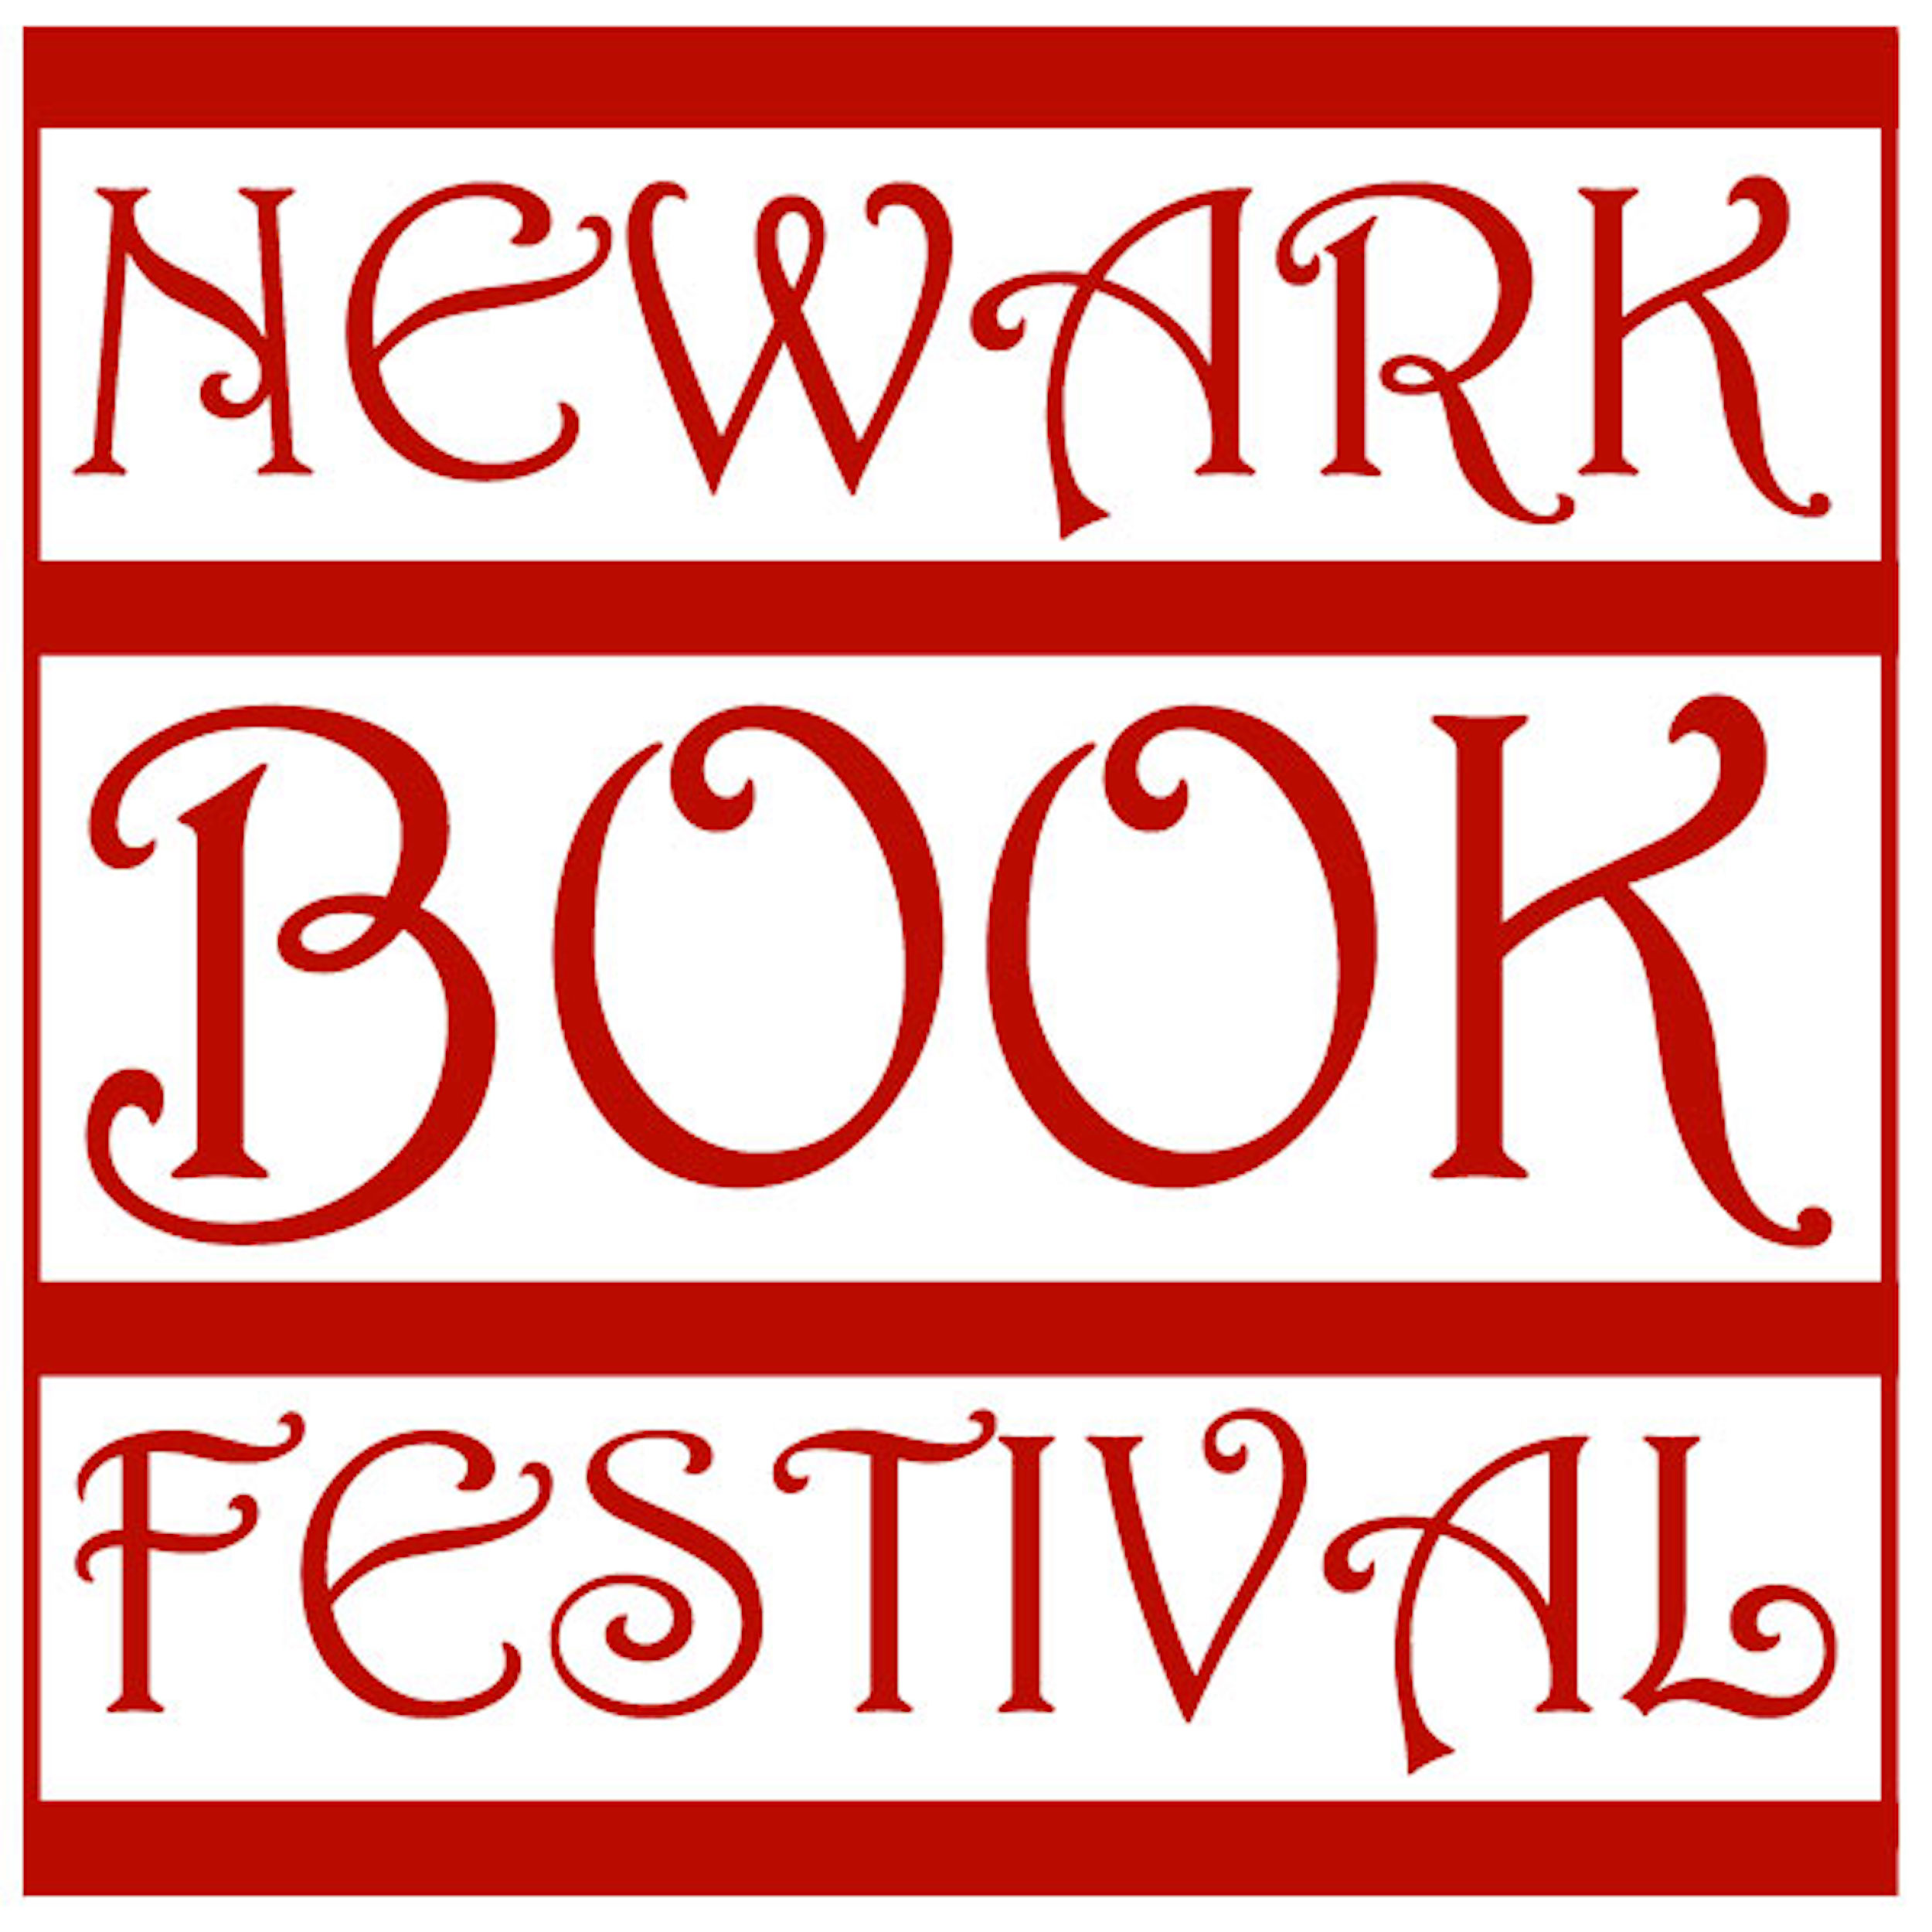 Newark Book Festival is a literature Festival that takes place in July 